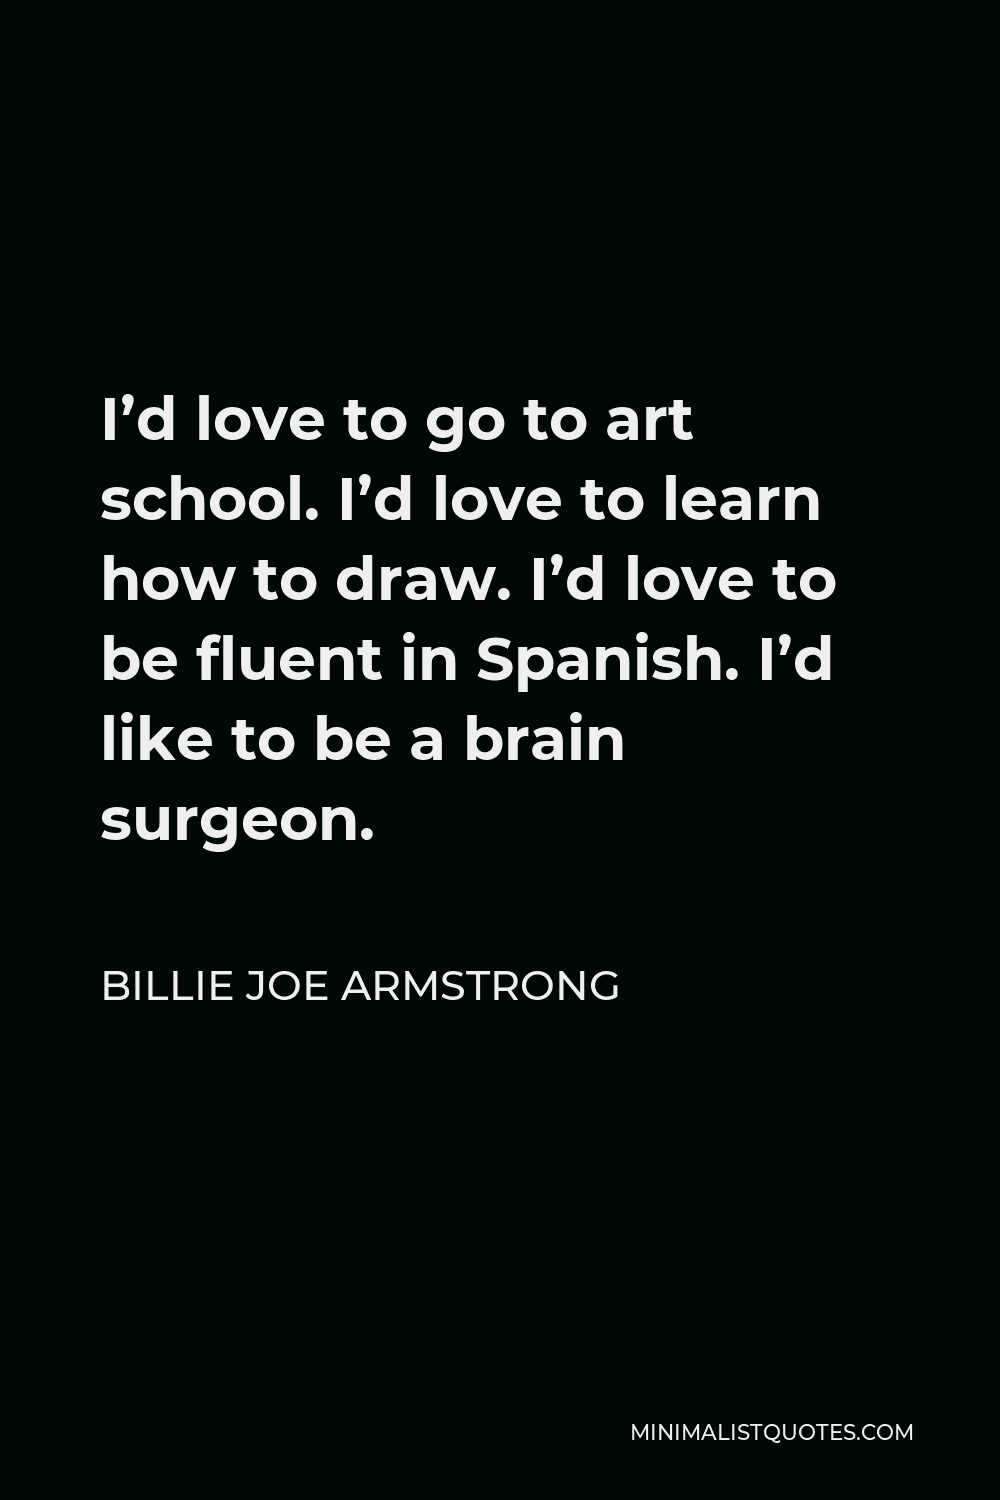 Billie Joe Armstrong Quote - I’d love to go to art school. I’d love to learn how to draw. I’d love to be fluent in Spanish. I’d like to be a brain surgeon.